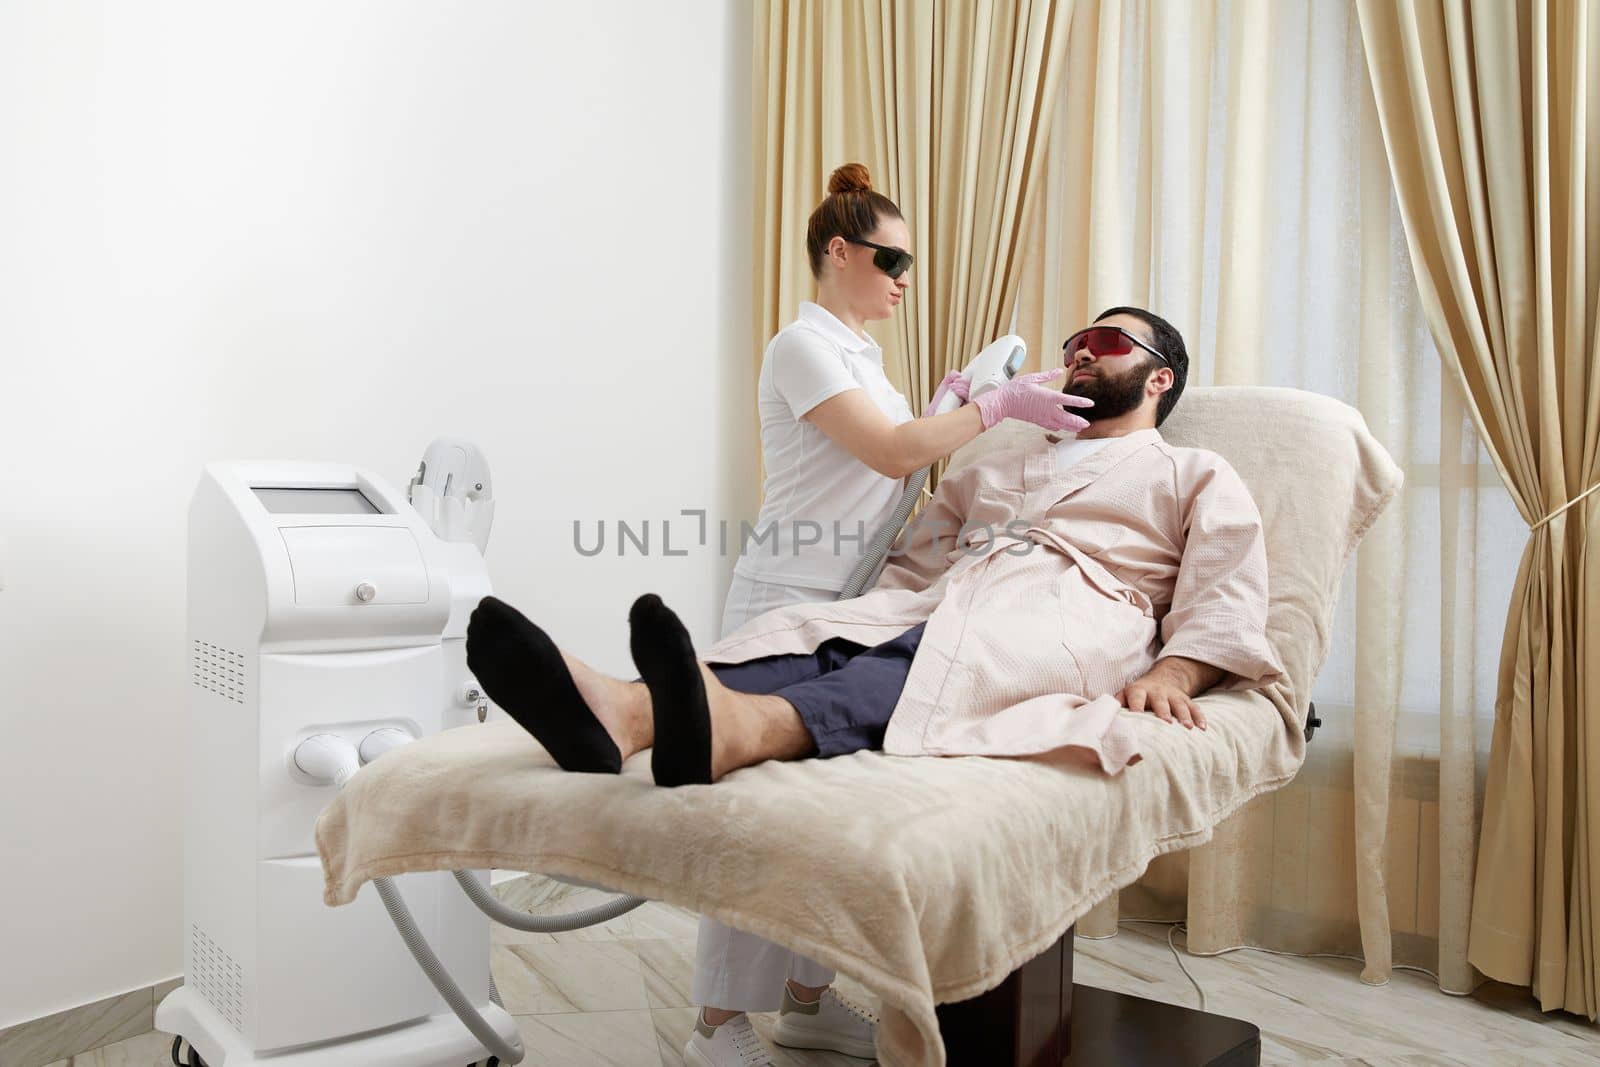 Man getting a laser hair removal on his face at cosmetologist by Mariakray